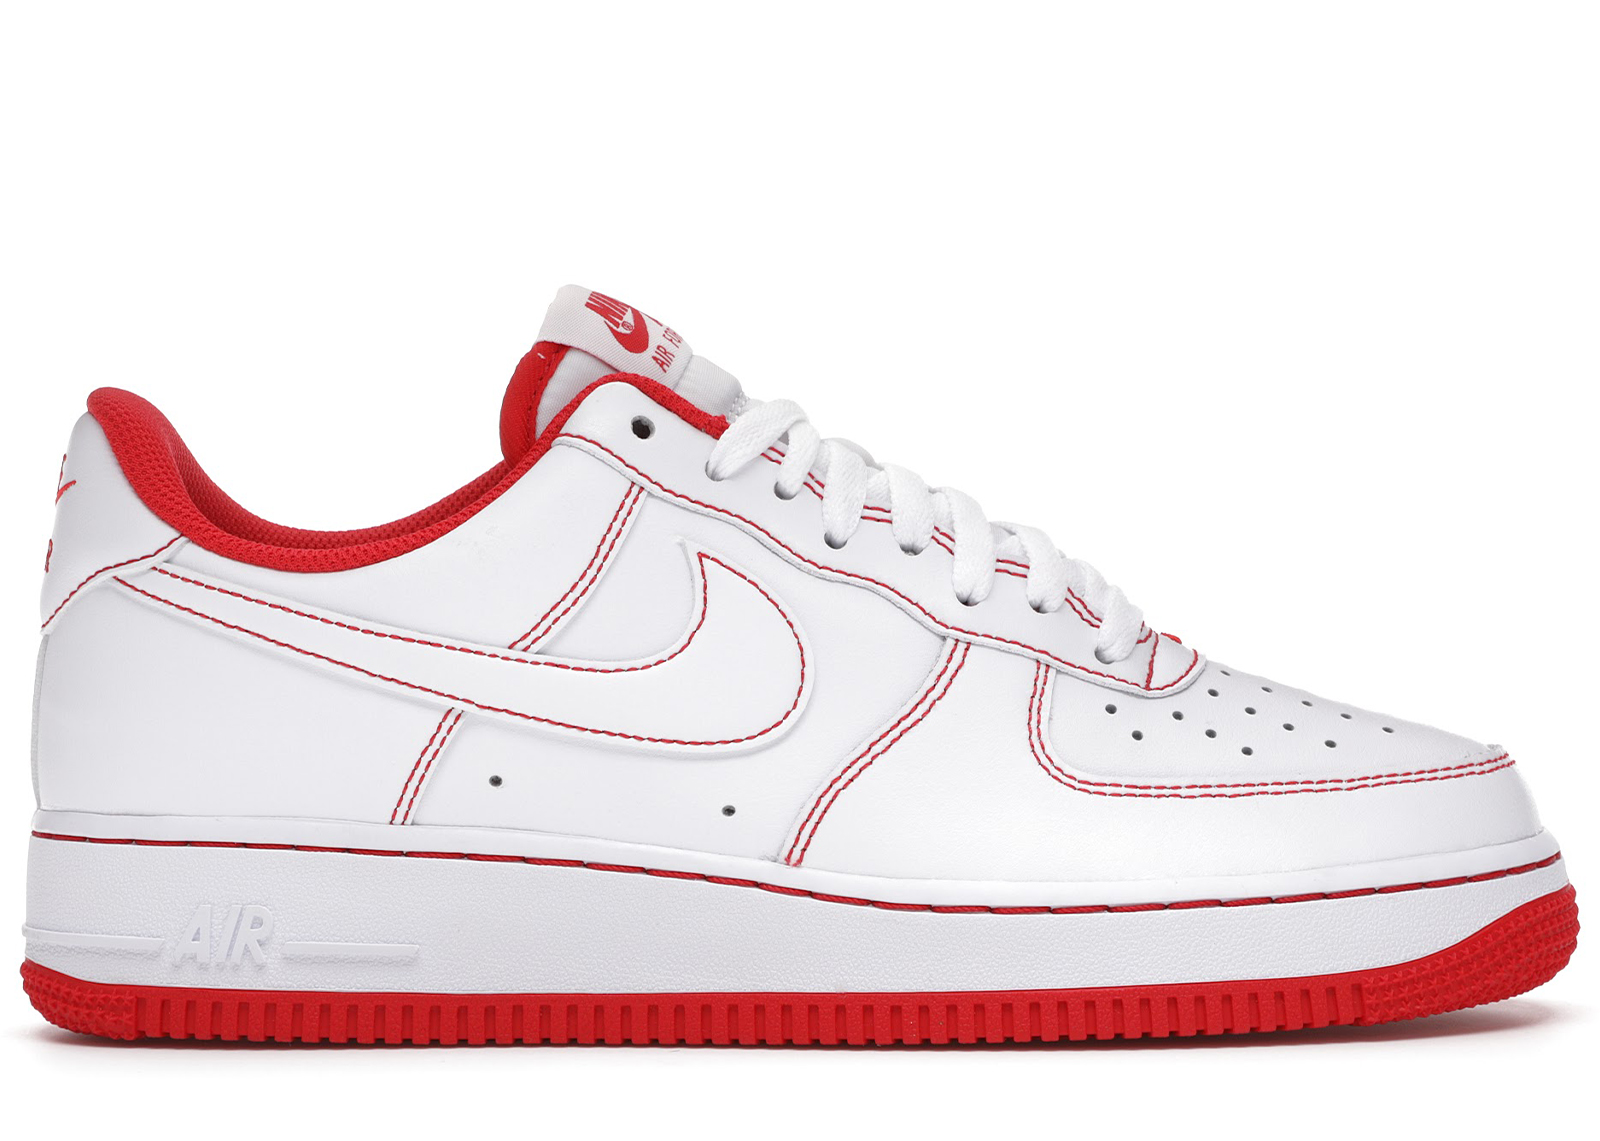 nike air force 1 07 university red